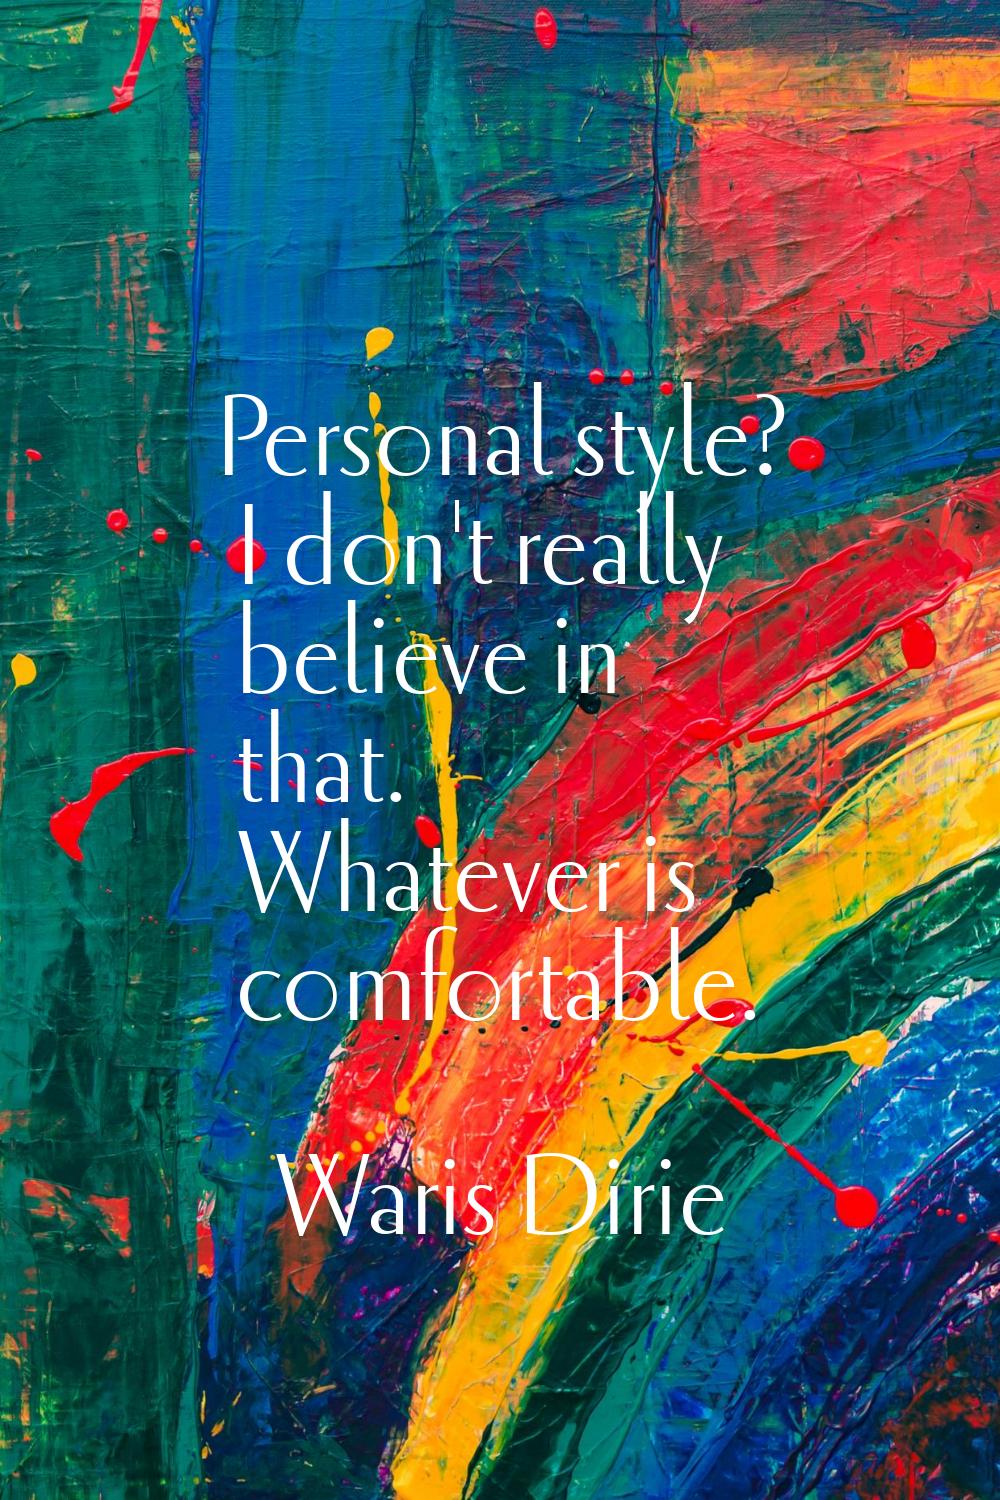 Personal style? I don't really believe in that. Whatever is comfortable.